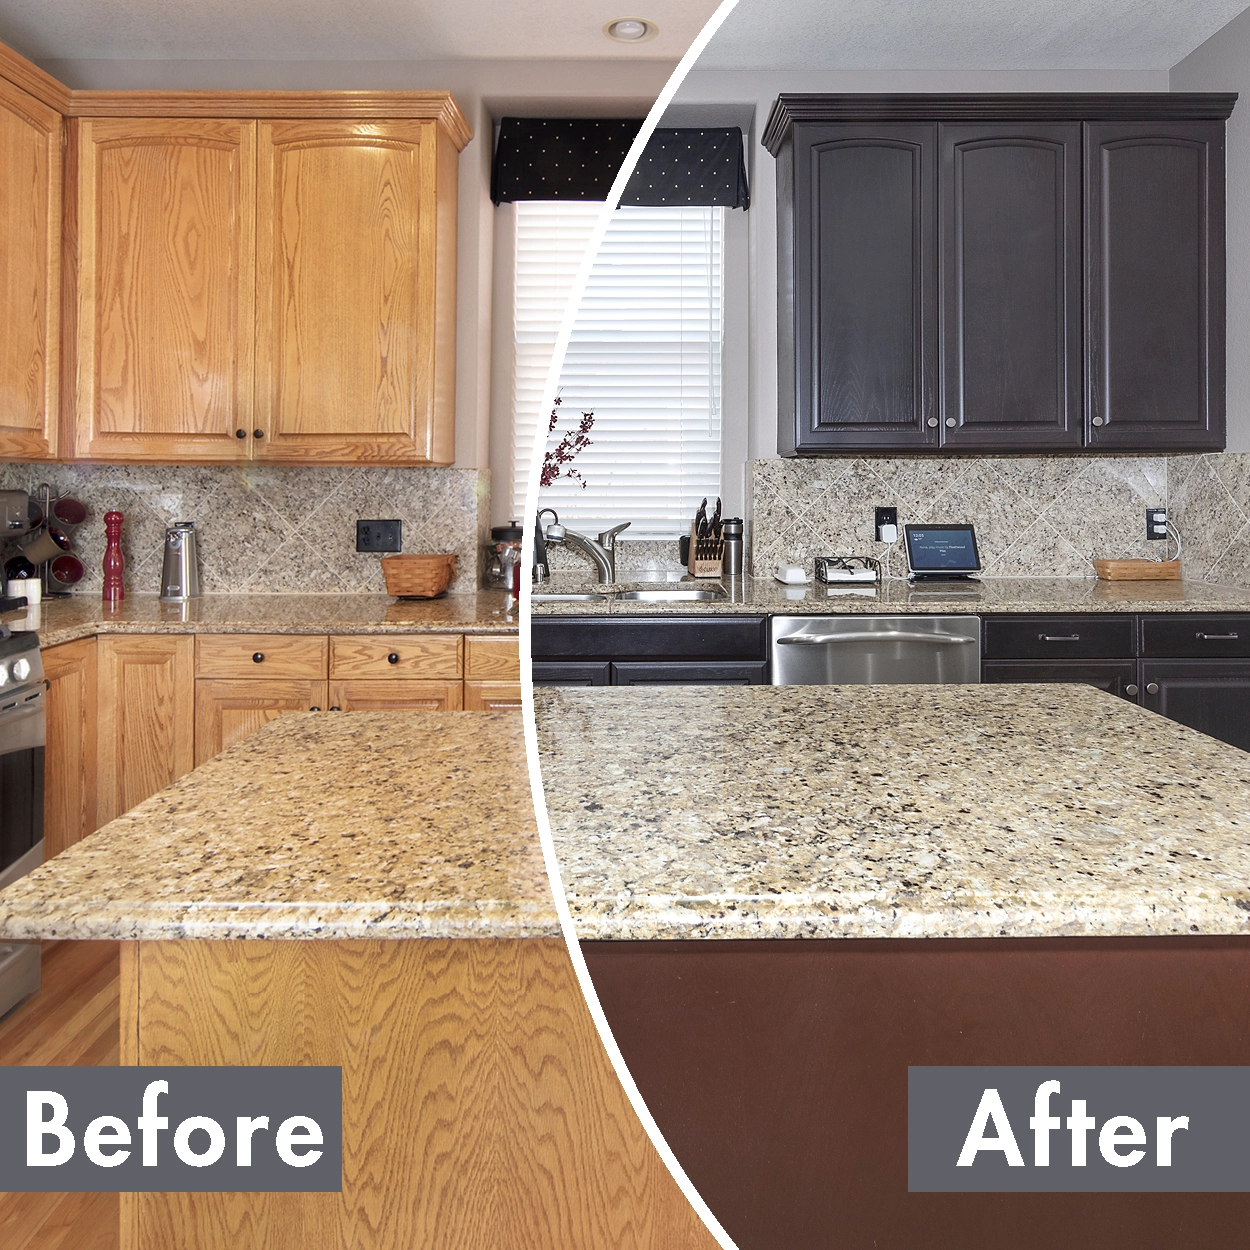 Cabinet Color Change N Hance, Can You Change The Color Of Kitchen Cabinets